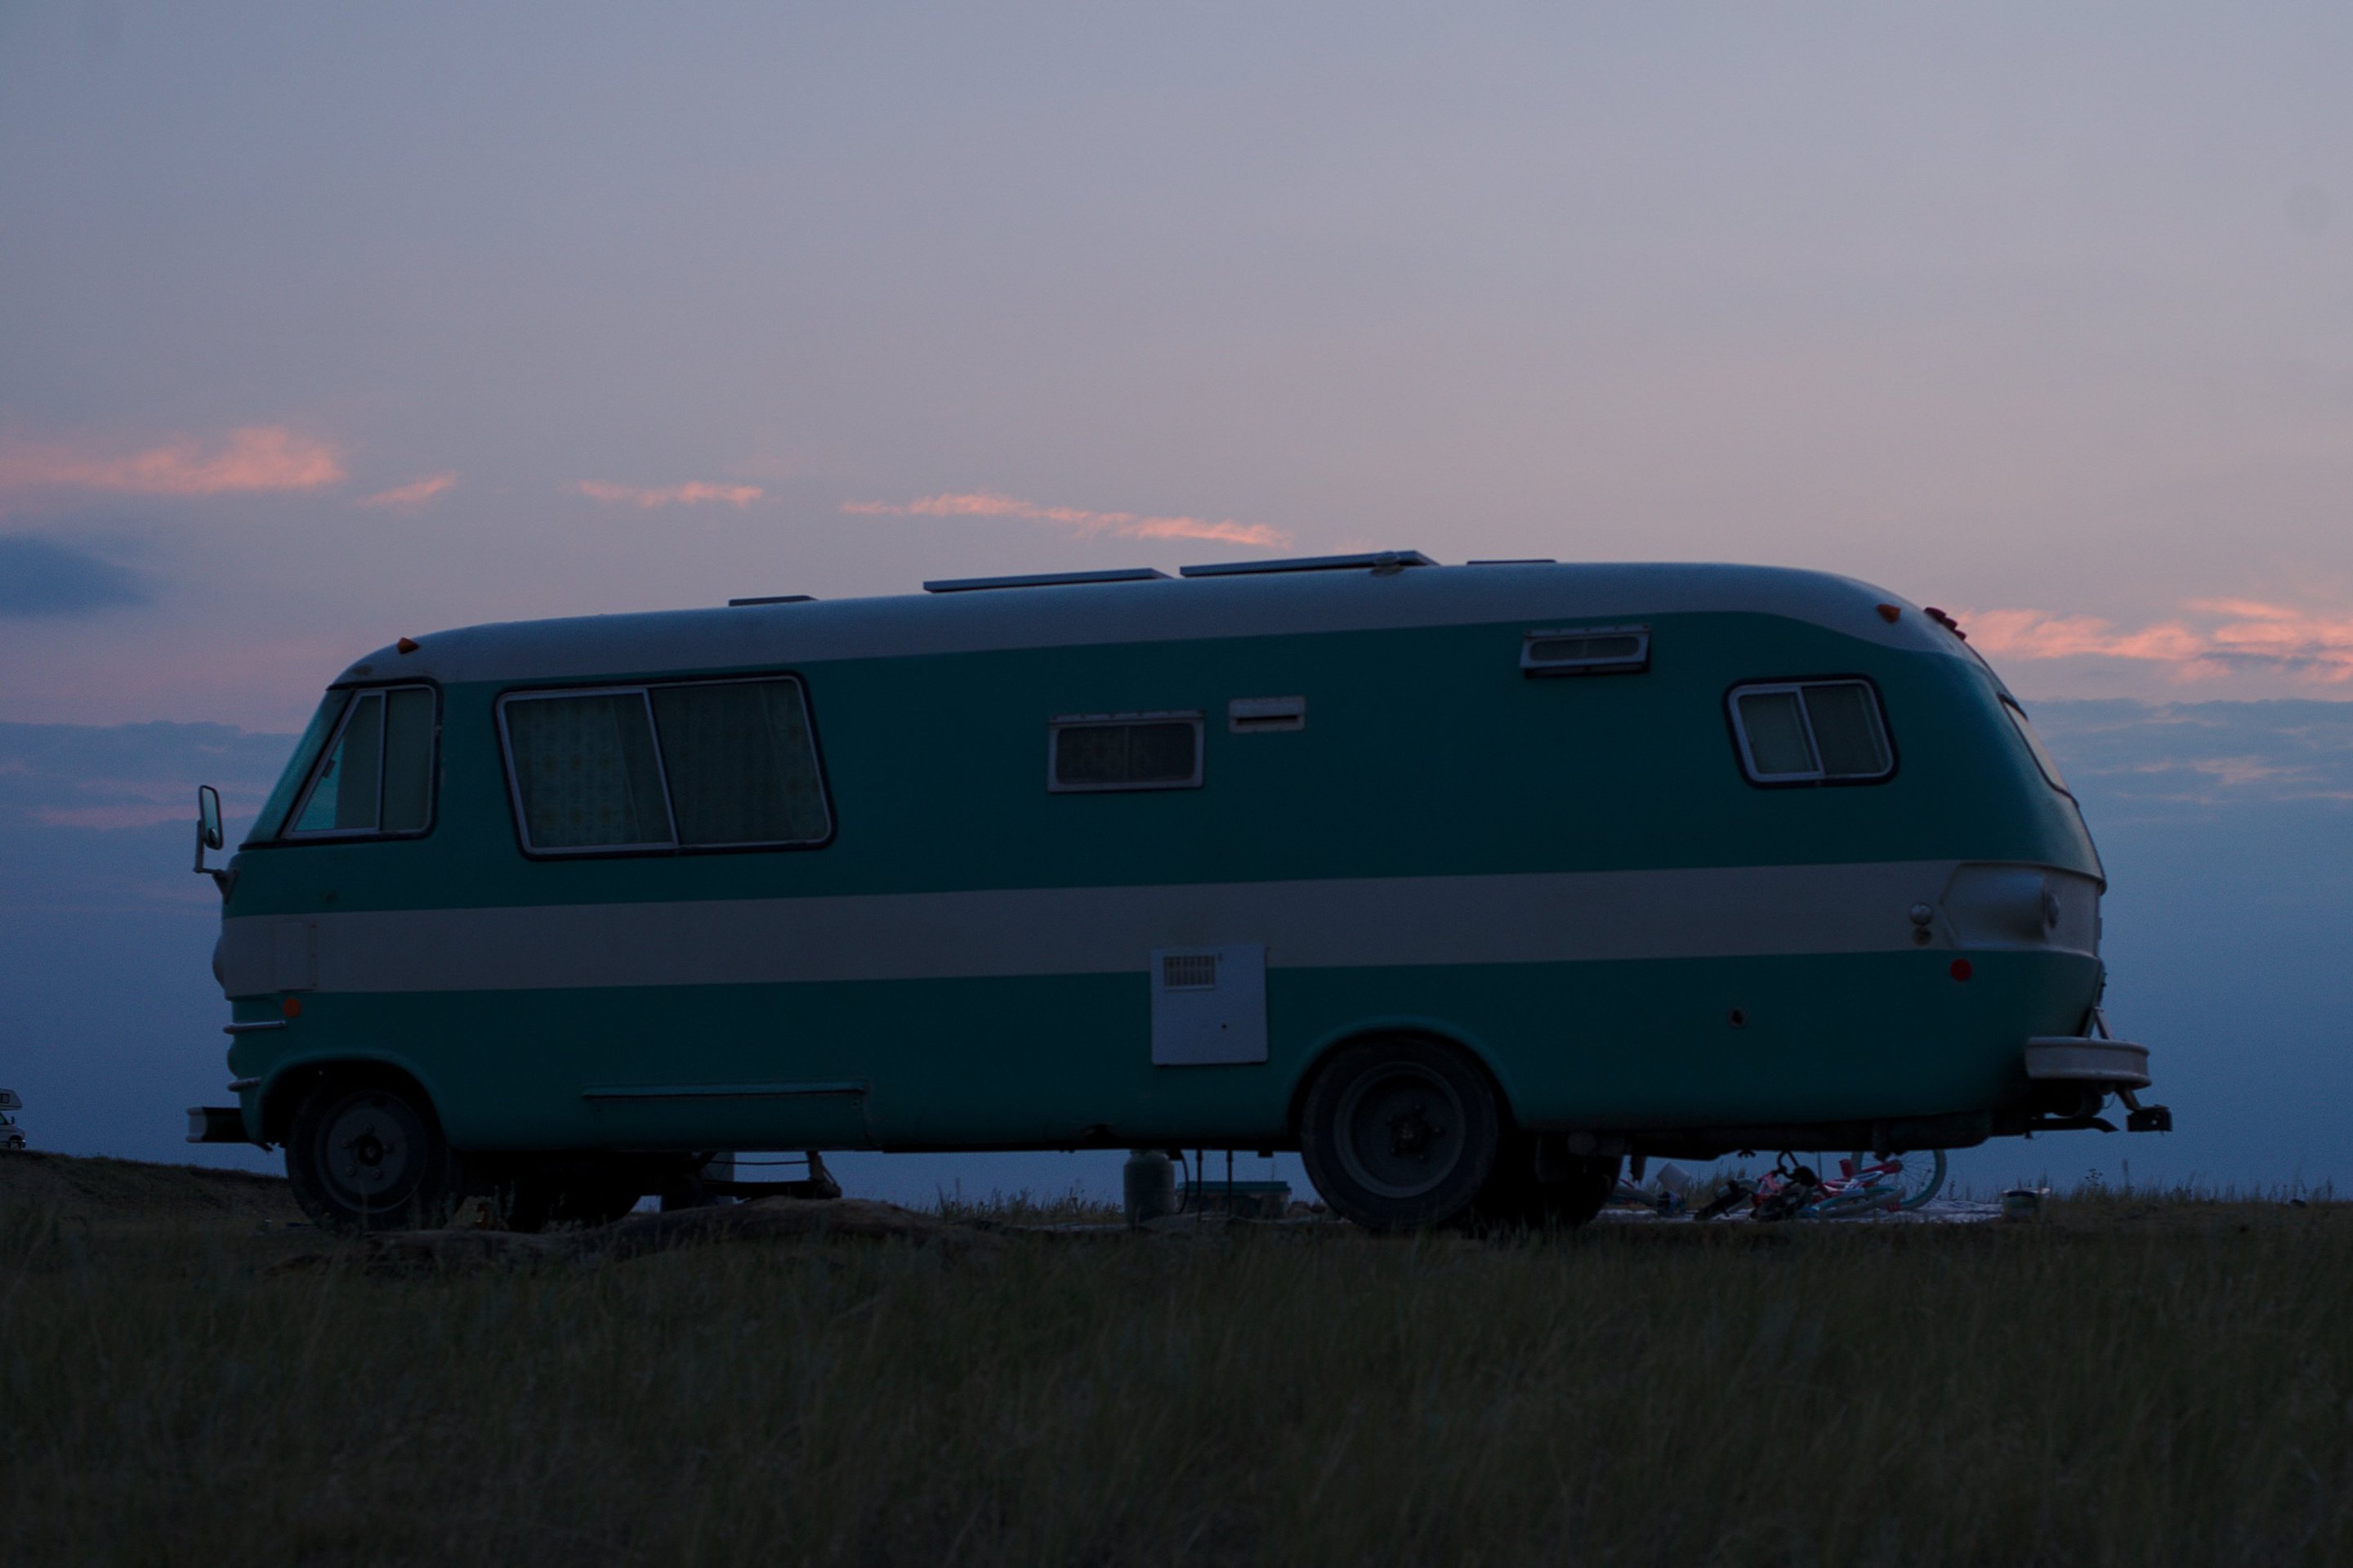 sunrise over the bus, buffalo gap national grasslands, wall, sd photographed by luxagraf